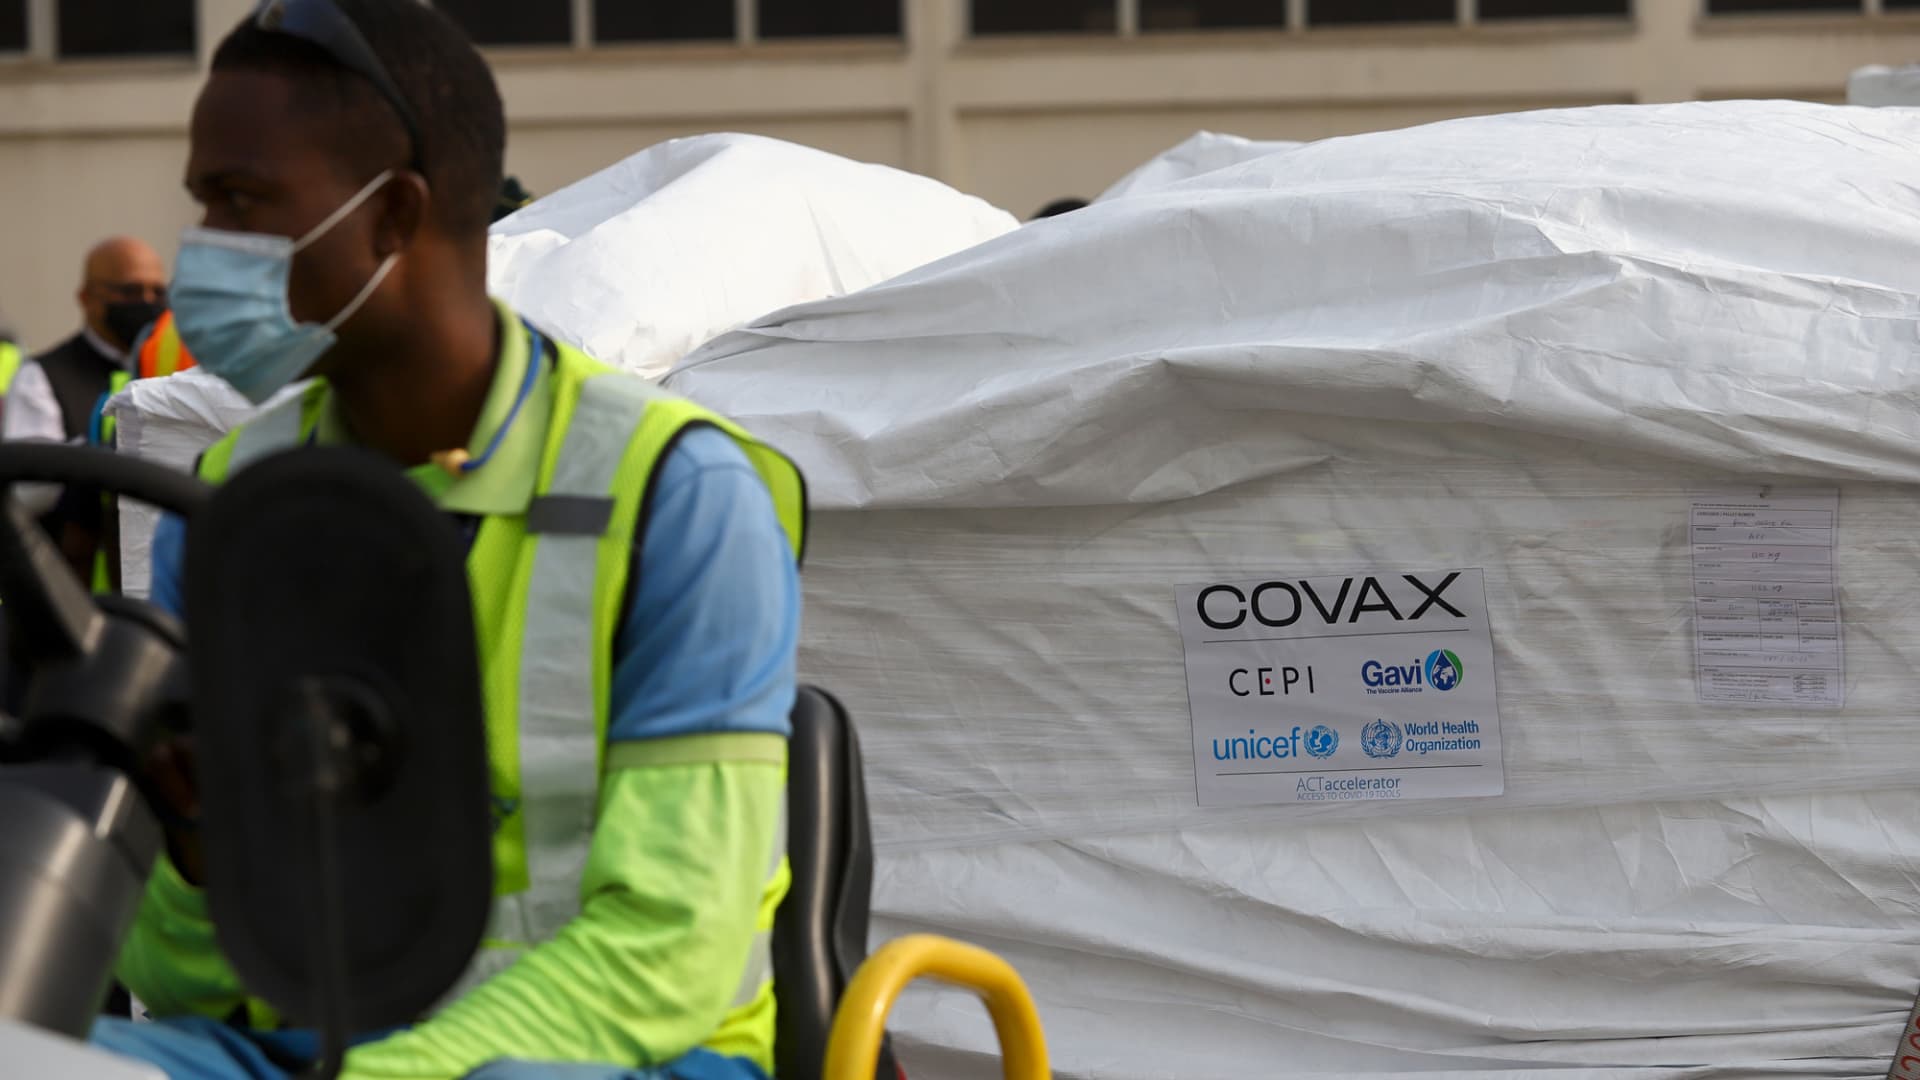 A shipment of Covid-19 vaccines from the COVAX global vaccination program arrives at the Kotoka International Airport in Accra, Ghana, Feb. 24, 2021.